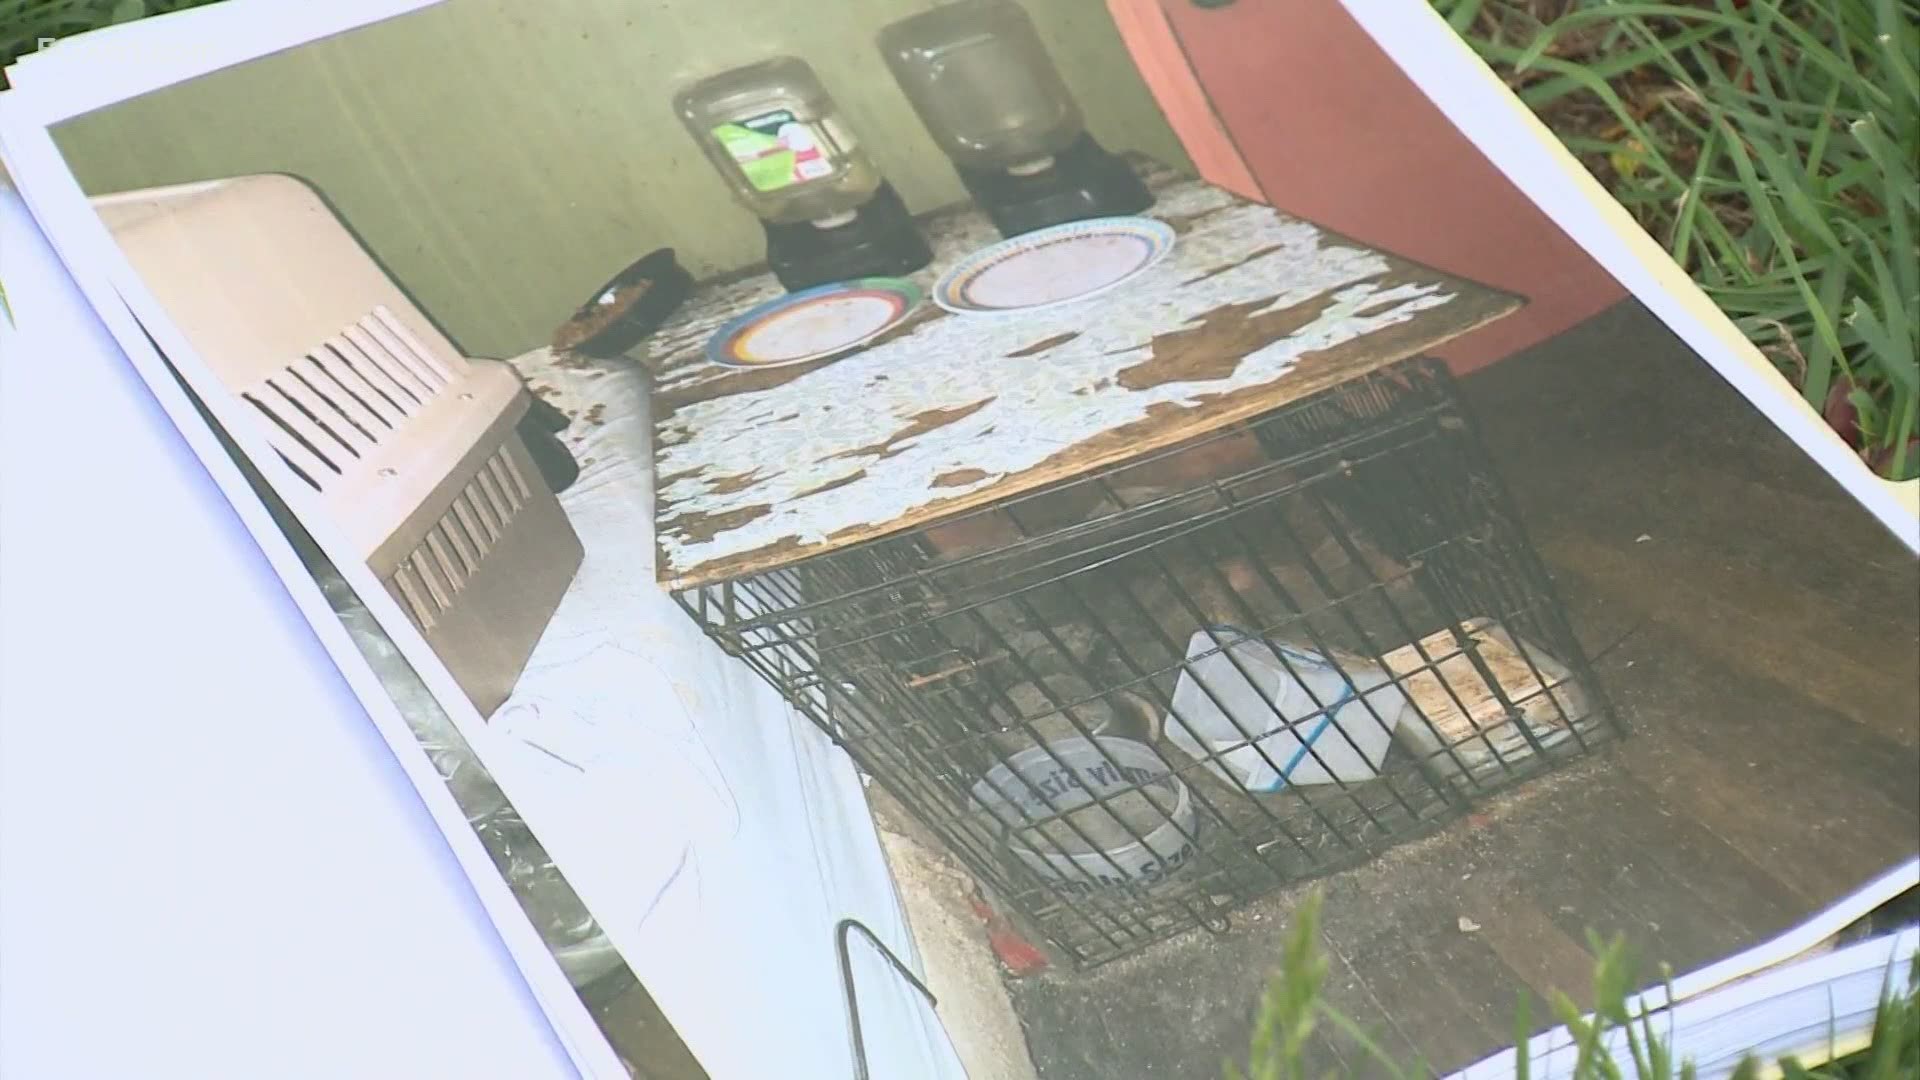 Police said 53 cats were found, 12 of which were dead, inside the home.